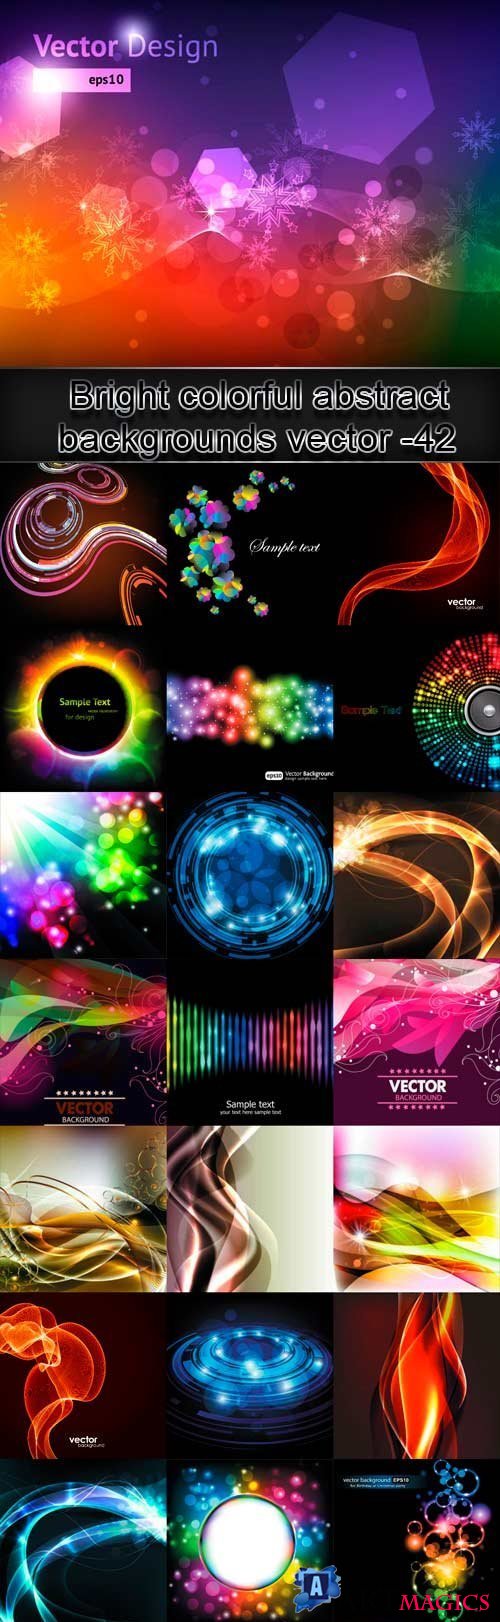 Bright colorful abstract backgrounds vector -42